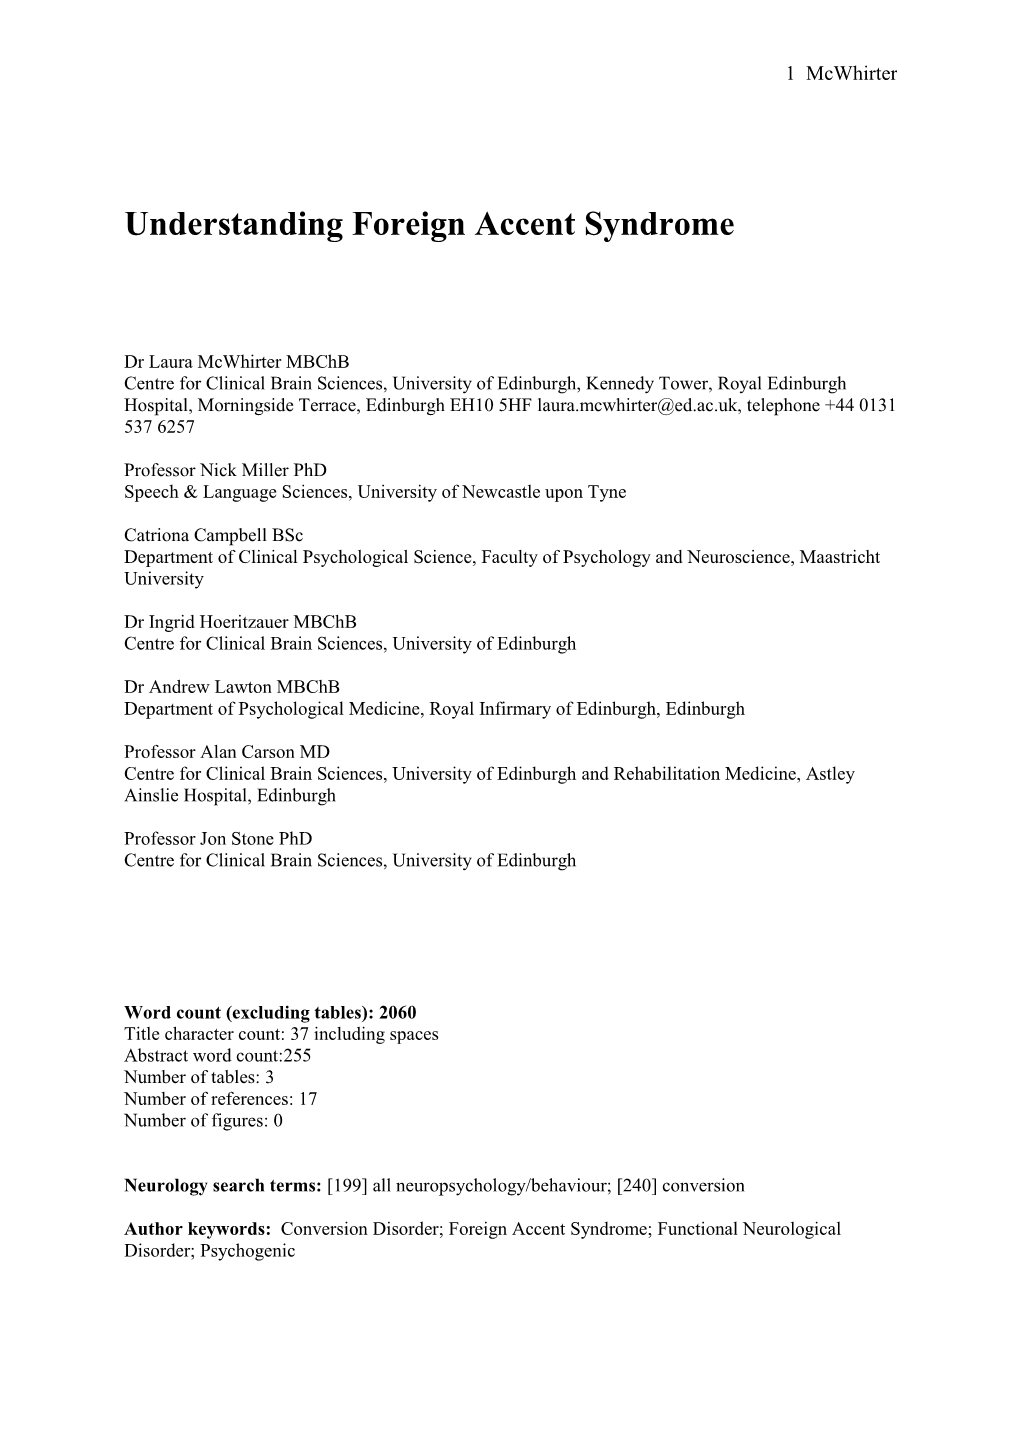 Understanding Foreign Accent Syndrome